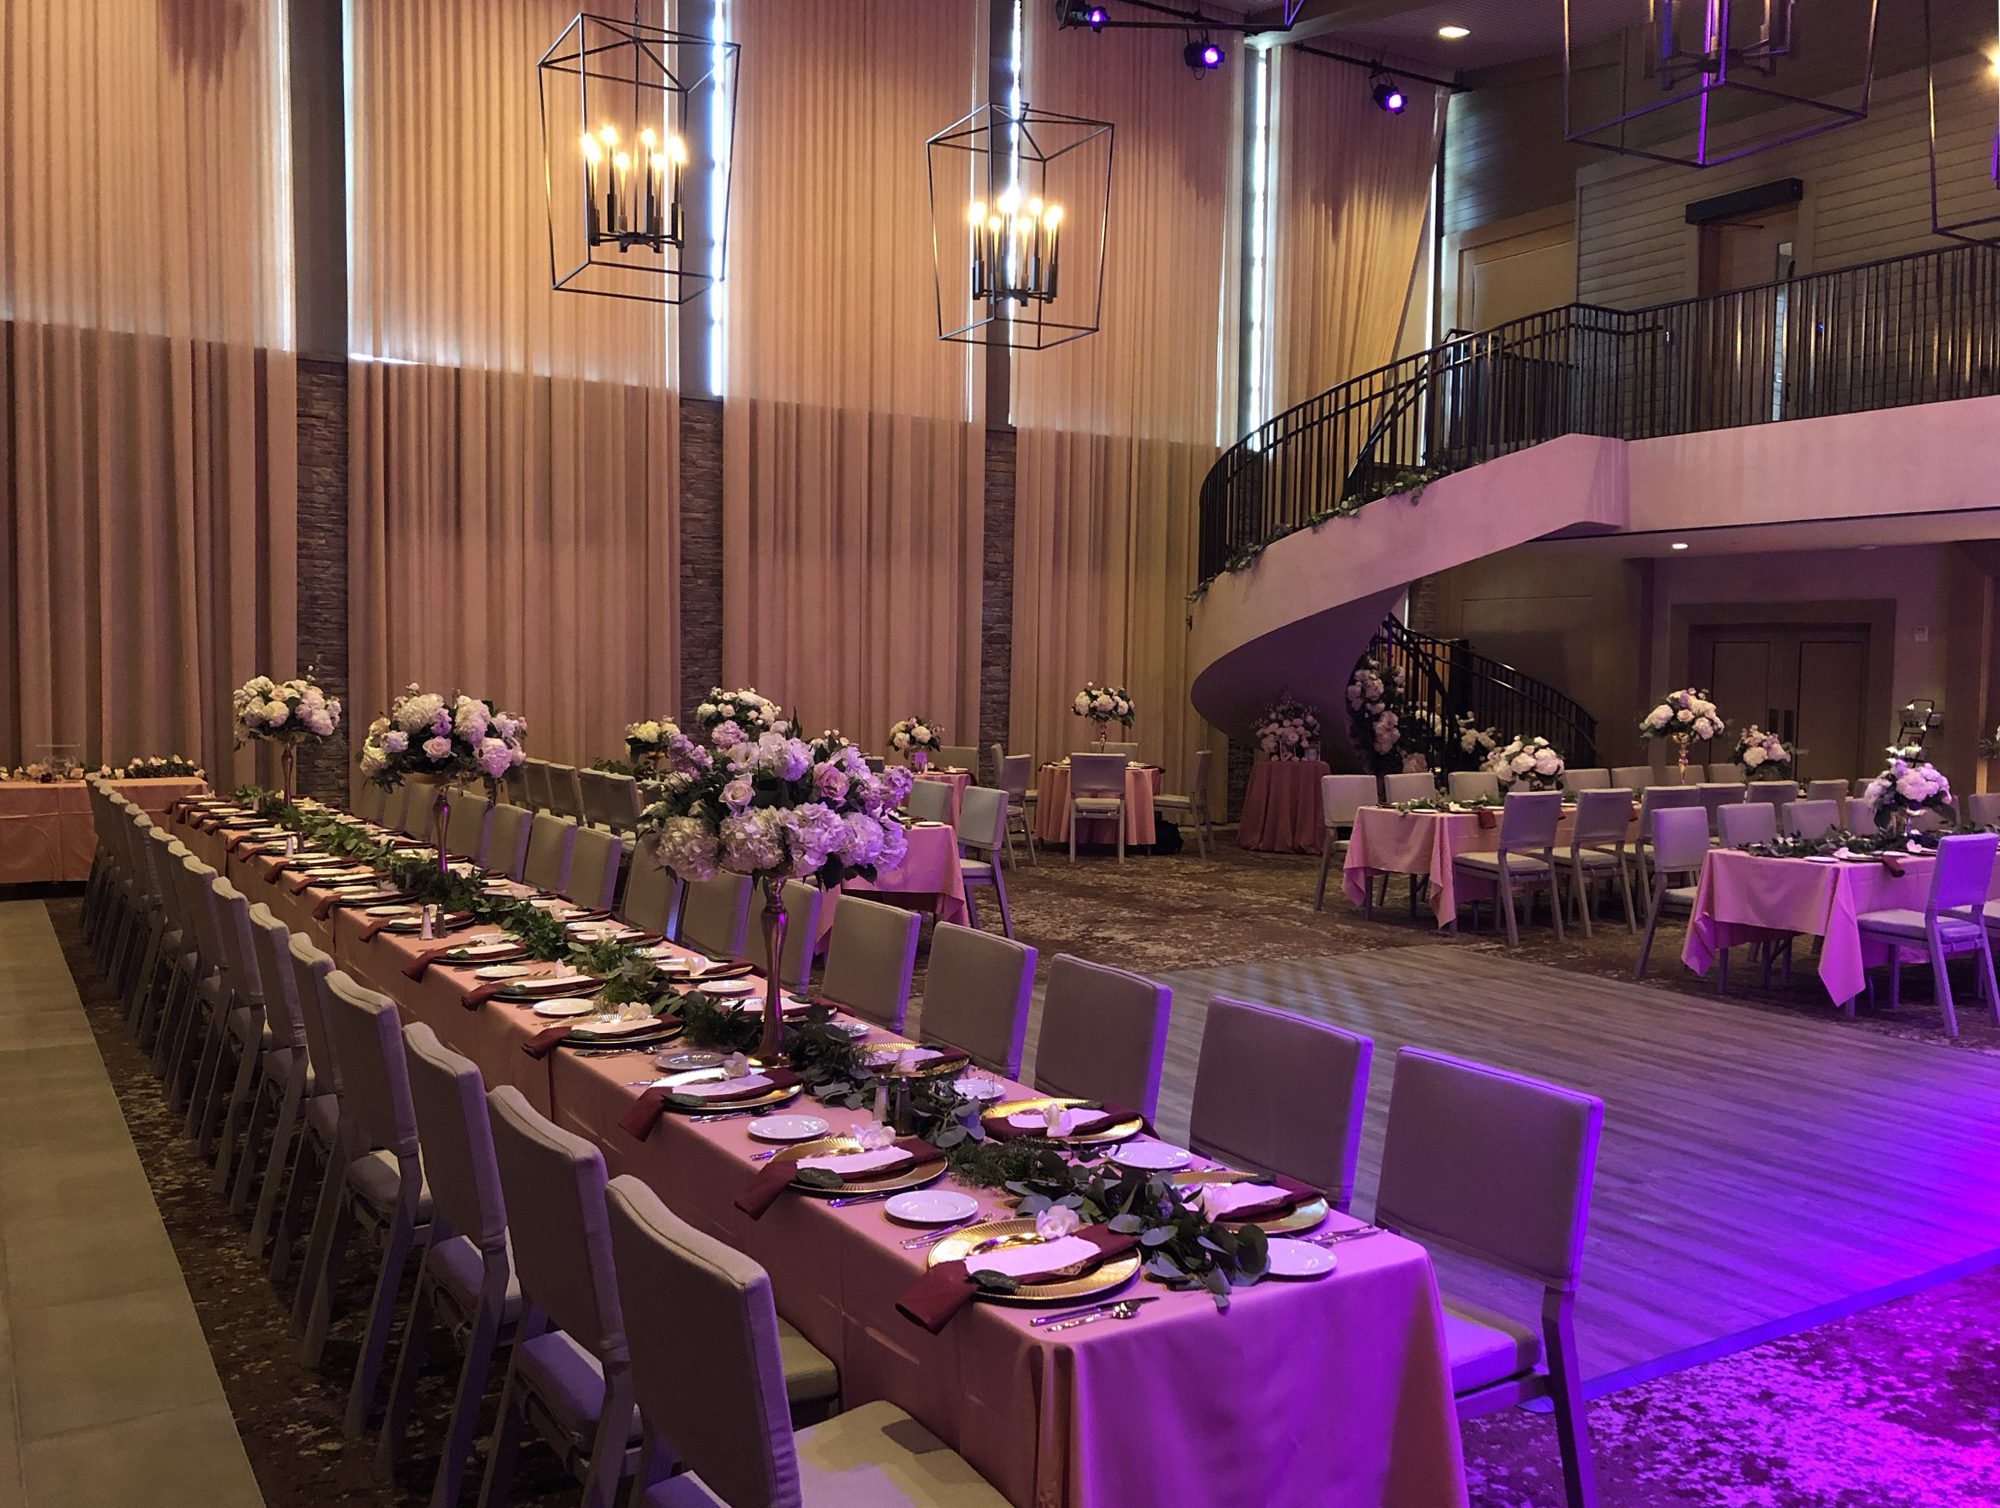 Event Space long table set for wedding